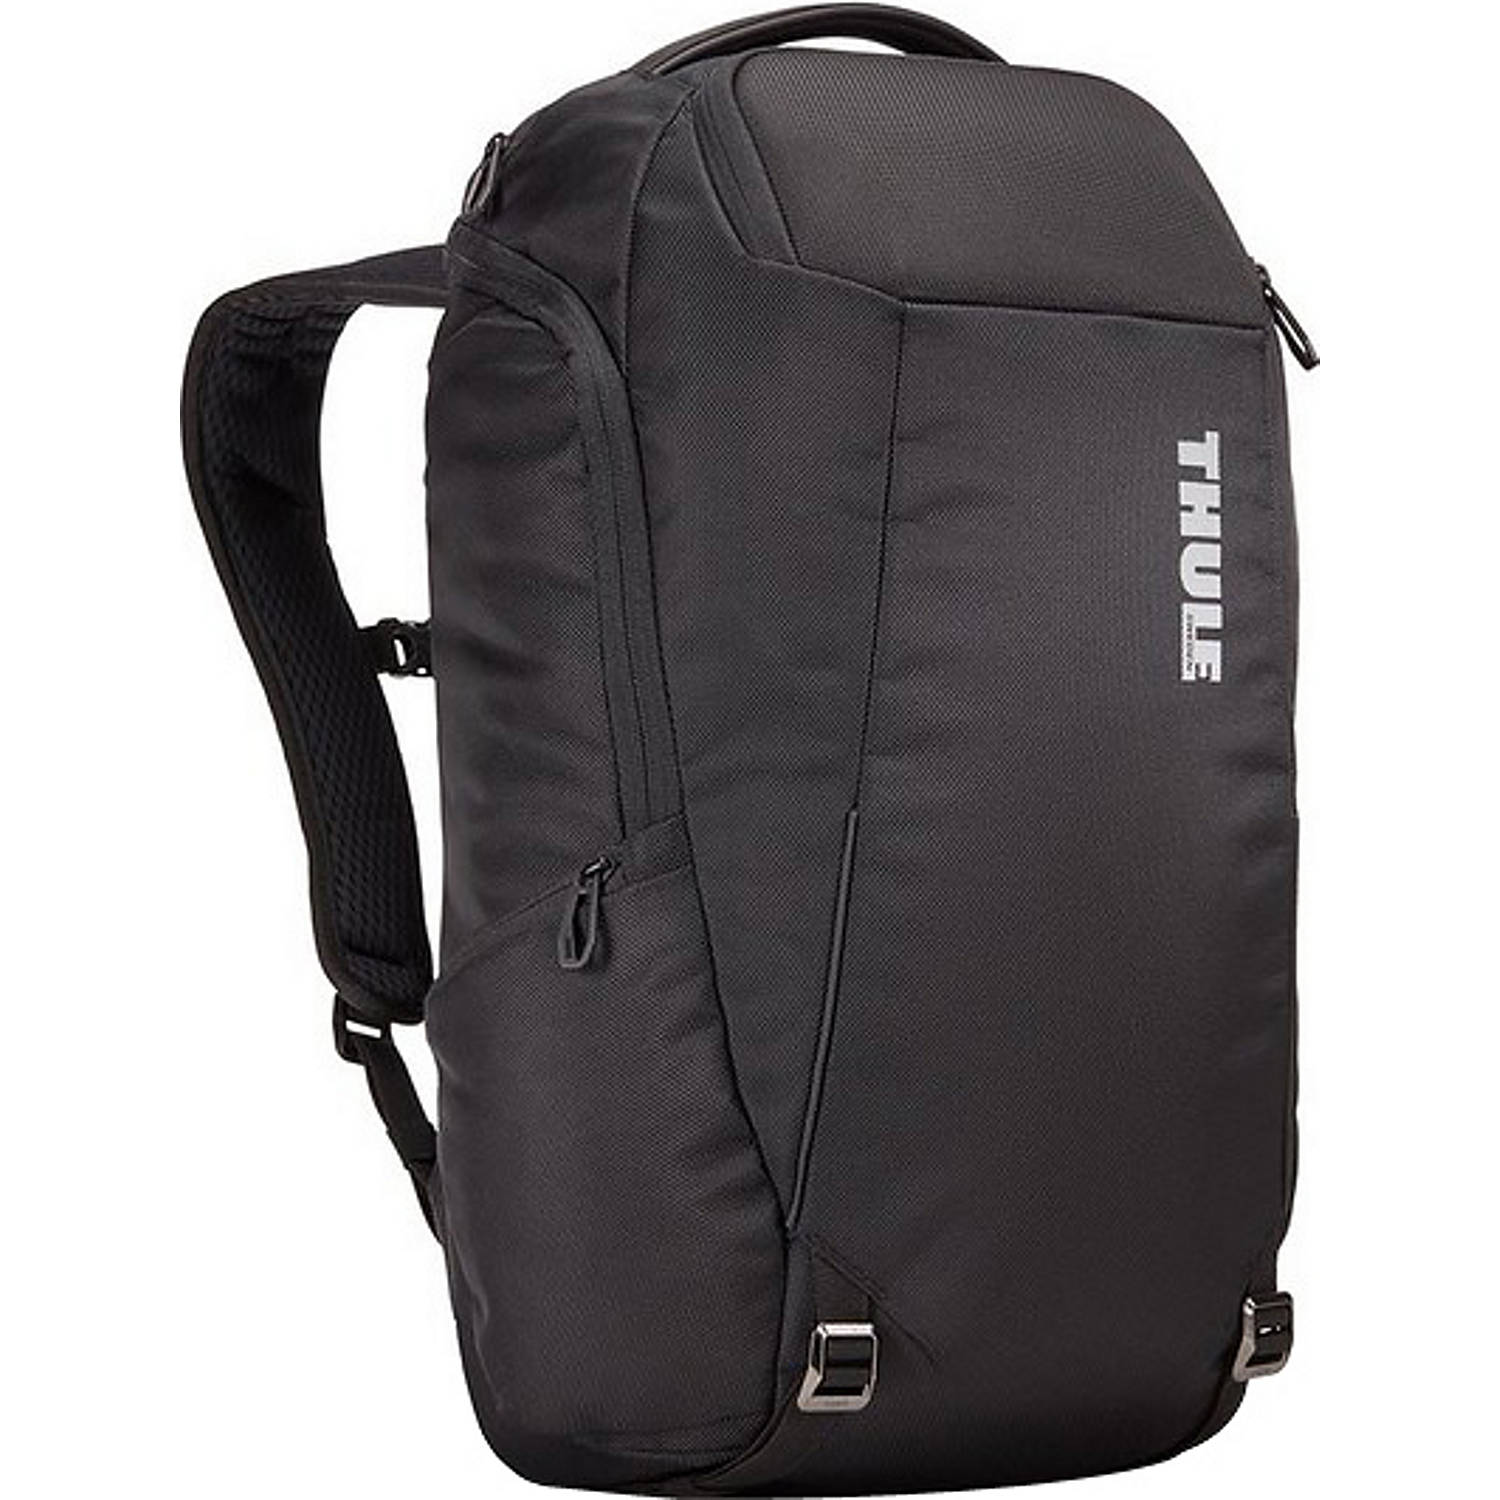 thule accent laptop backpack ebags tablet eagle black office desk target table lamp glass entrance wooden garden storage box top coffee set hall small ginger jar lamps martin home